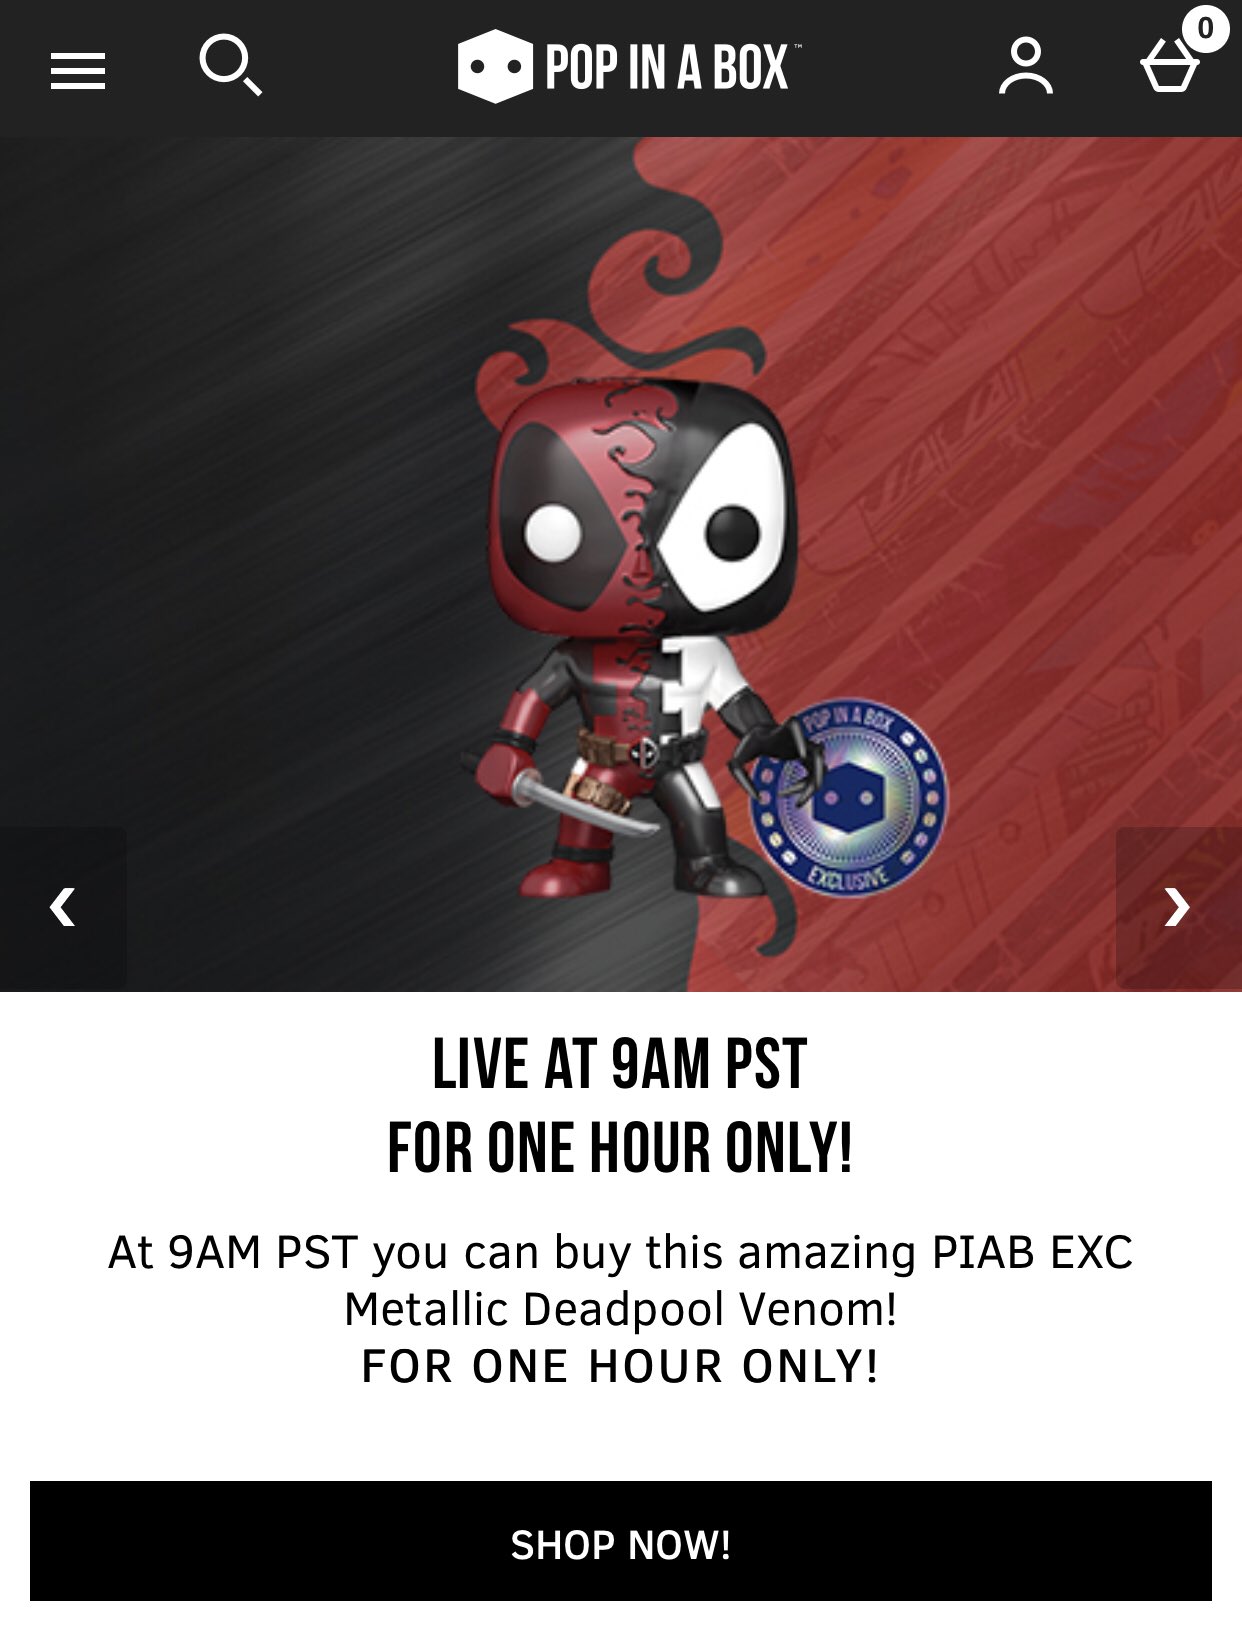 Forhøre Sæson romanforfatter TheVenomSite on Twitter: "Reminder that the exclusive Metallic Deadpool/Venom  Funko POP from @PopInABox drops in 40 minutes! https://t.co/MhMWrQVMZP  https://t.co/Pfwc2afsGJ" / Twitter